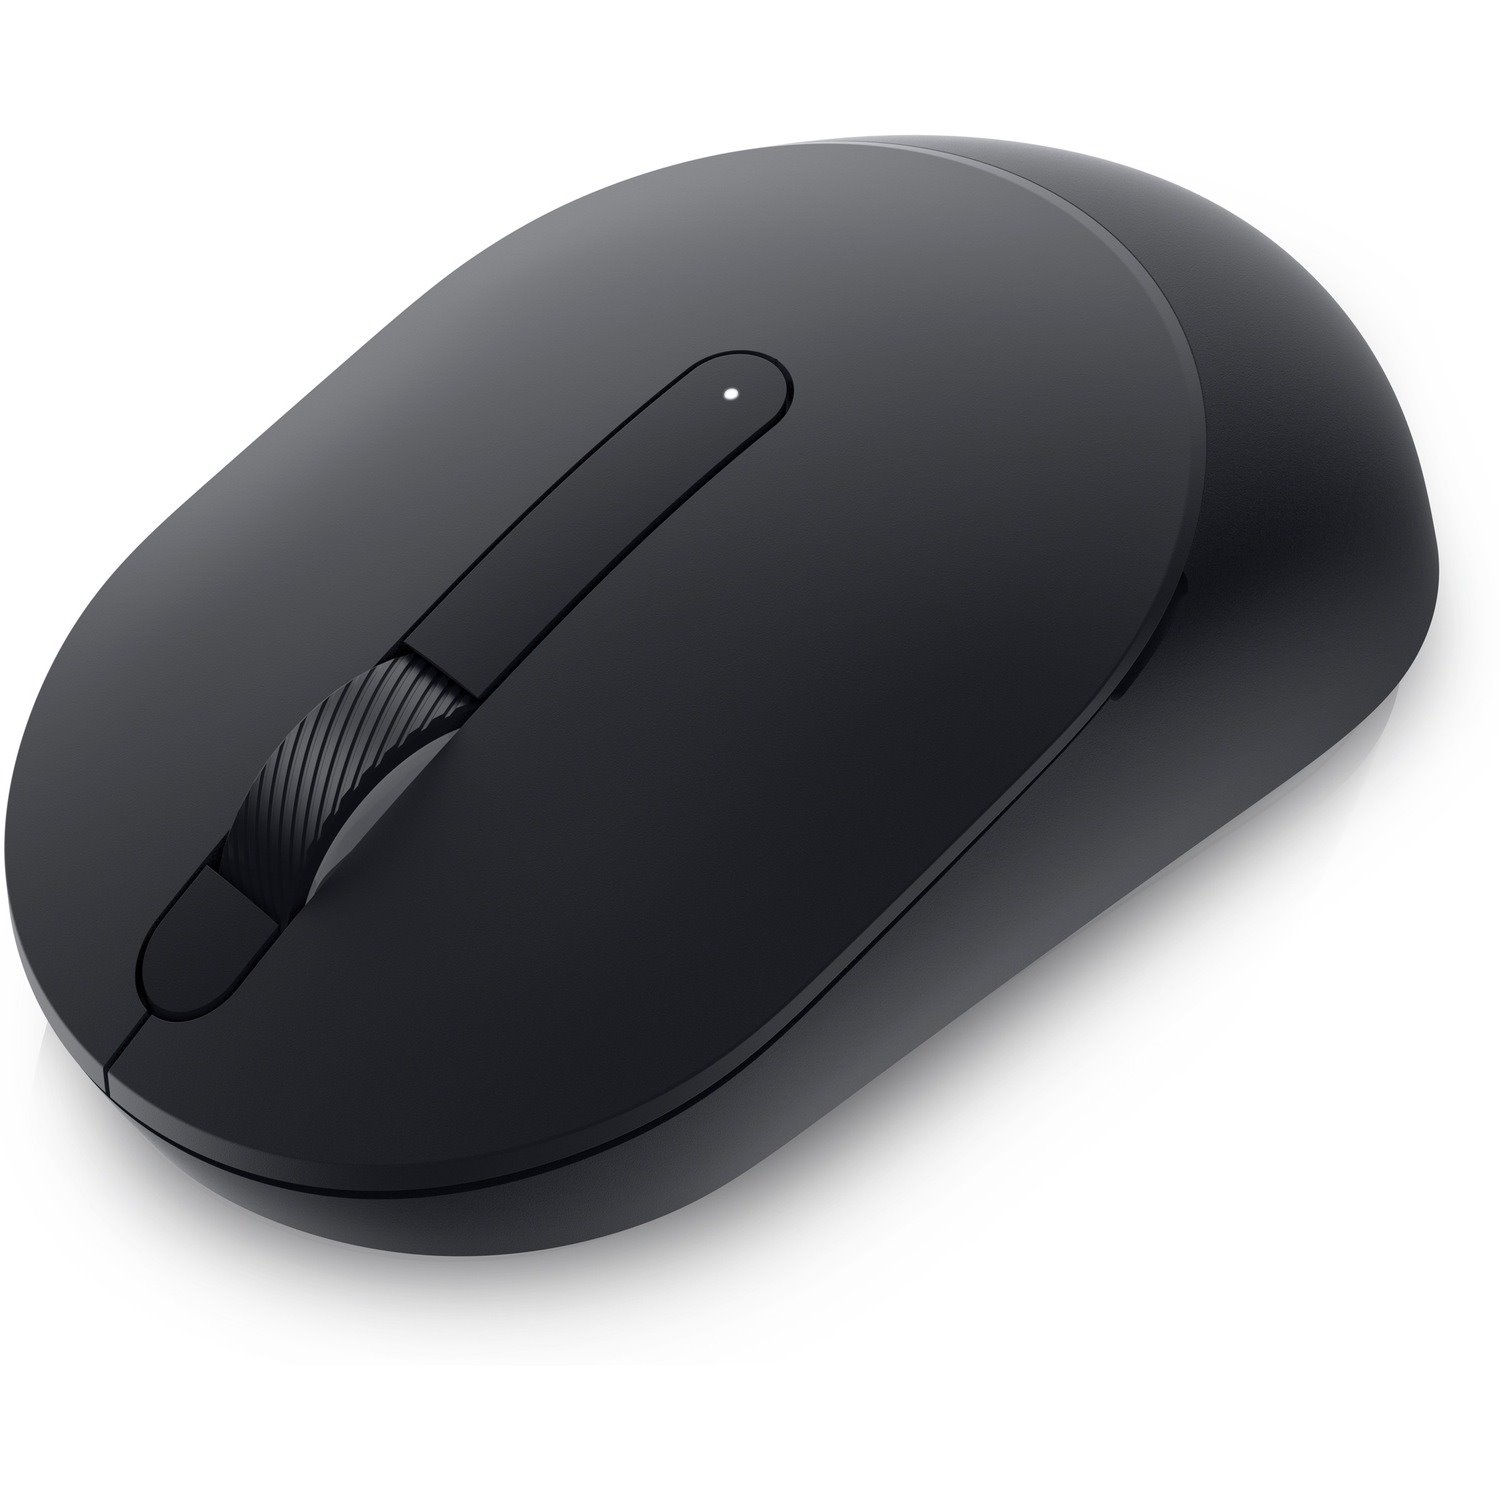 Dell MS300 Full-size Mouse - Radio Frequency - USB - Optical - 3 Button(s) - Black